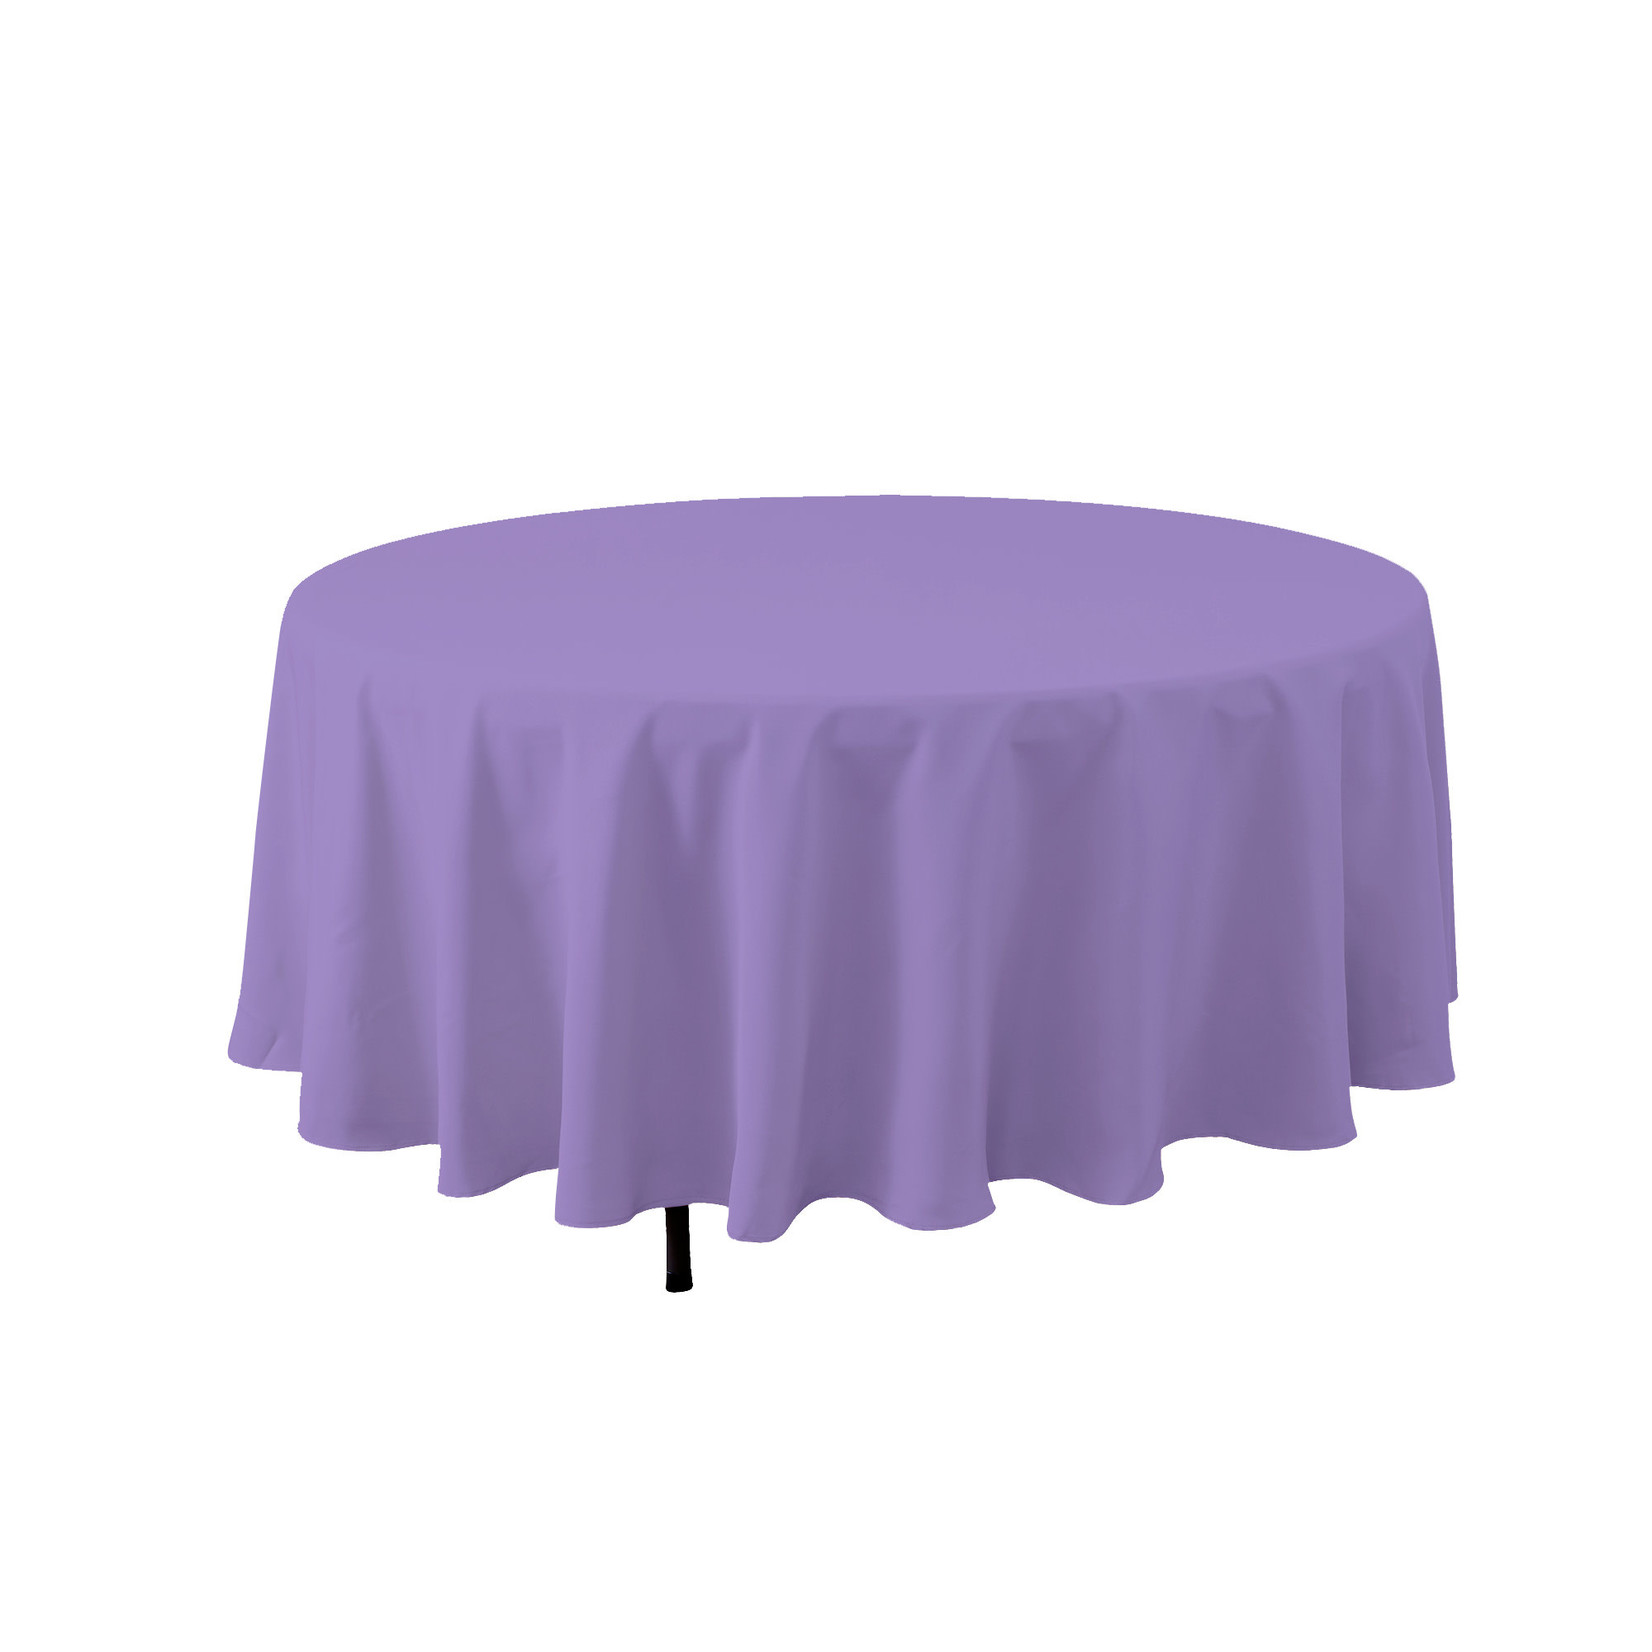 LAVENDER ROUND POLYESTER TABLE COVER 108''